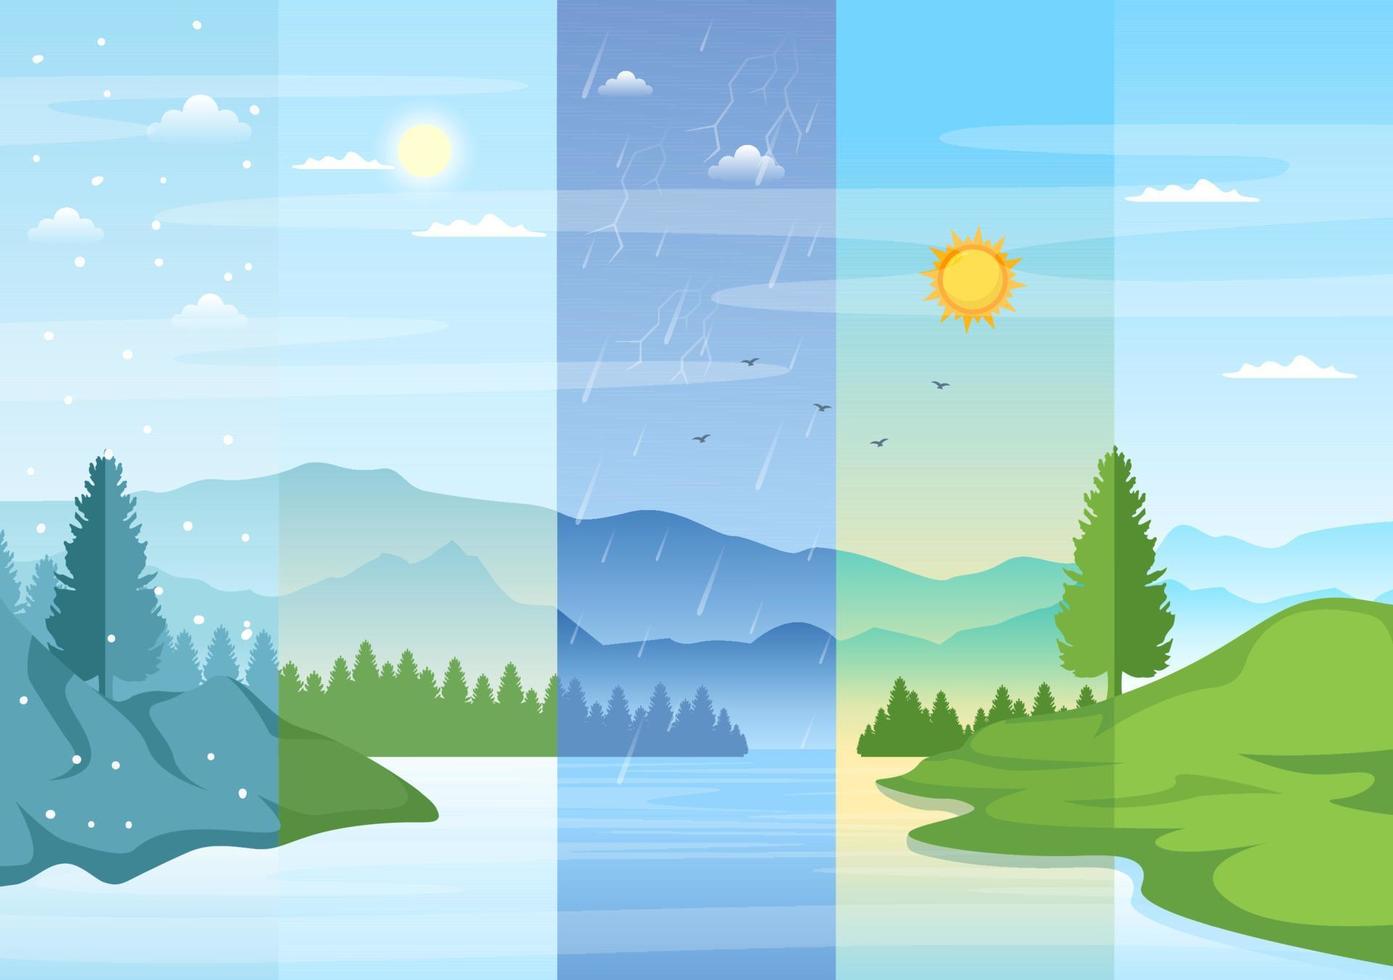 Types of Weather Conditions with Sunny, Cloudy, Windy, Rainy, Snow and Stormy in Template Hand Drawn Cartoon Flat Illustration vector